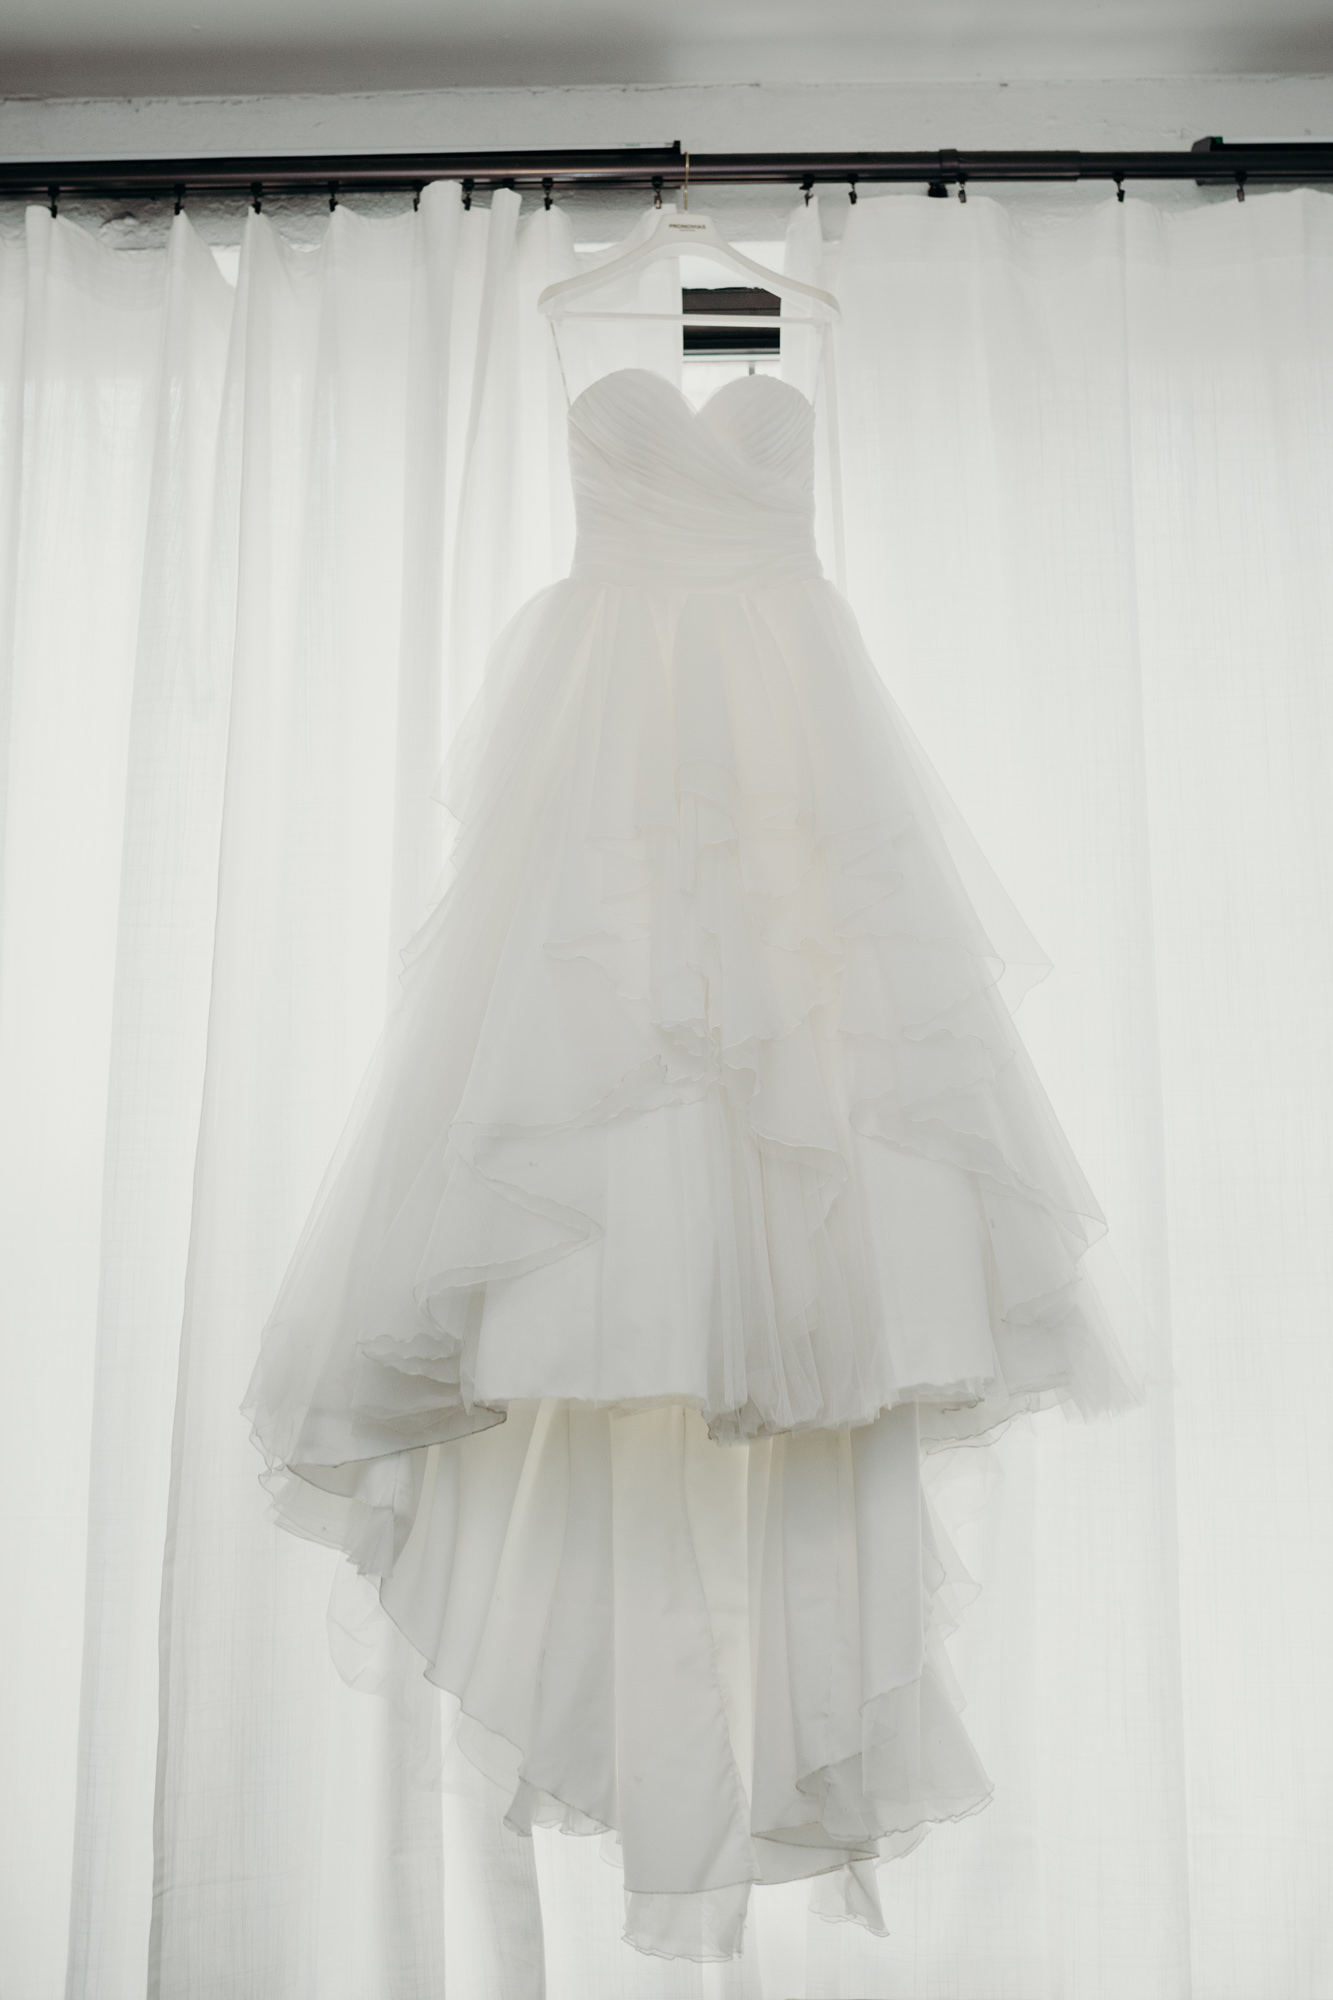 wedding gown hanging in the window at mymoon in brooklyn, new york